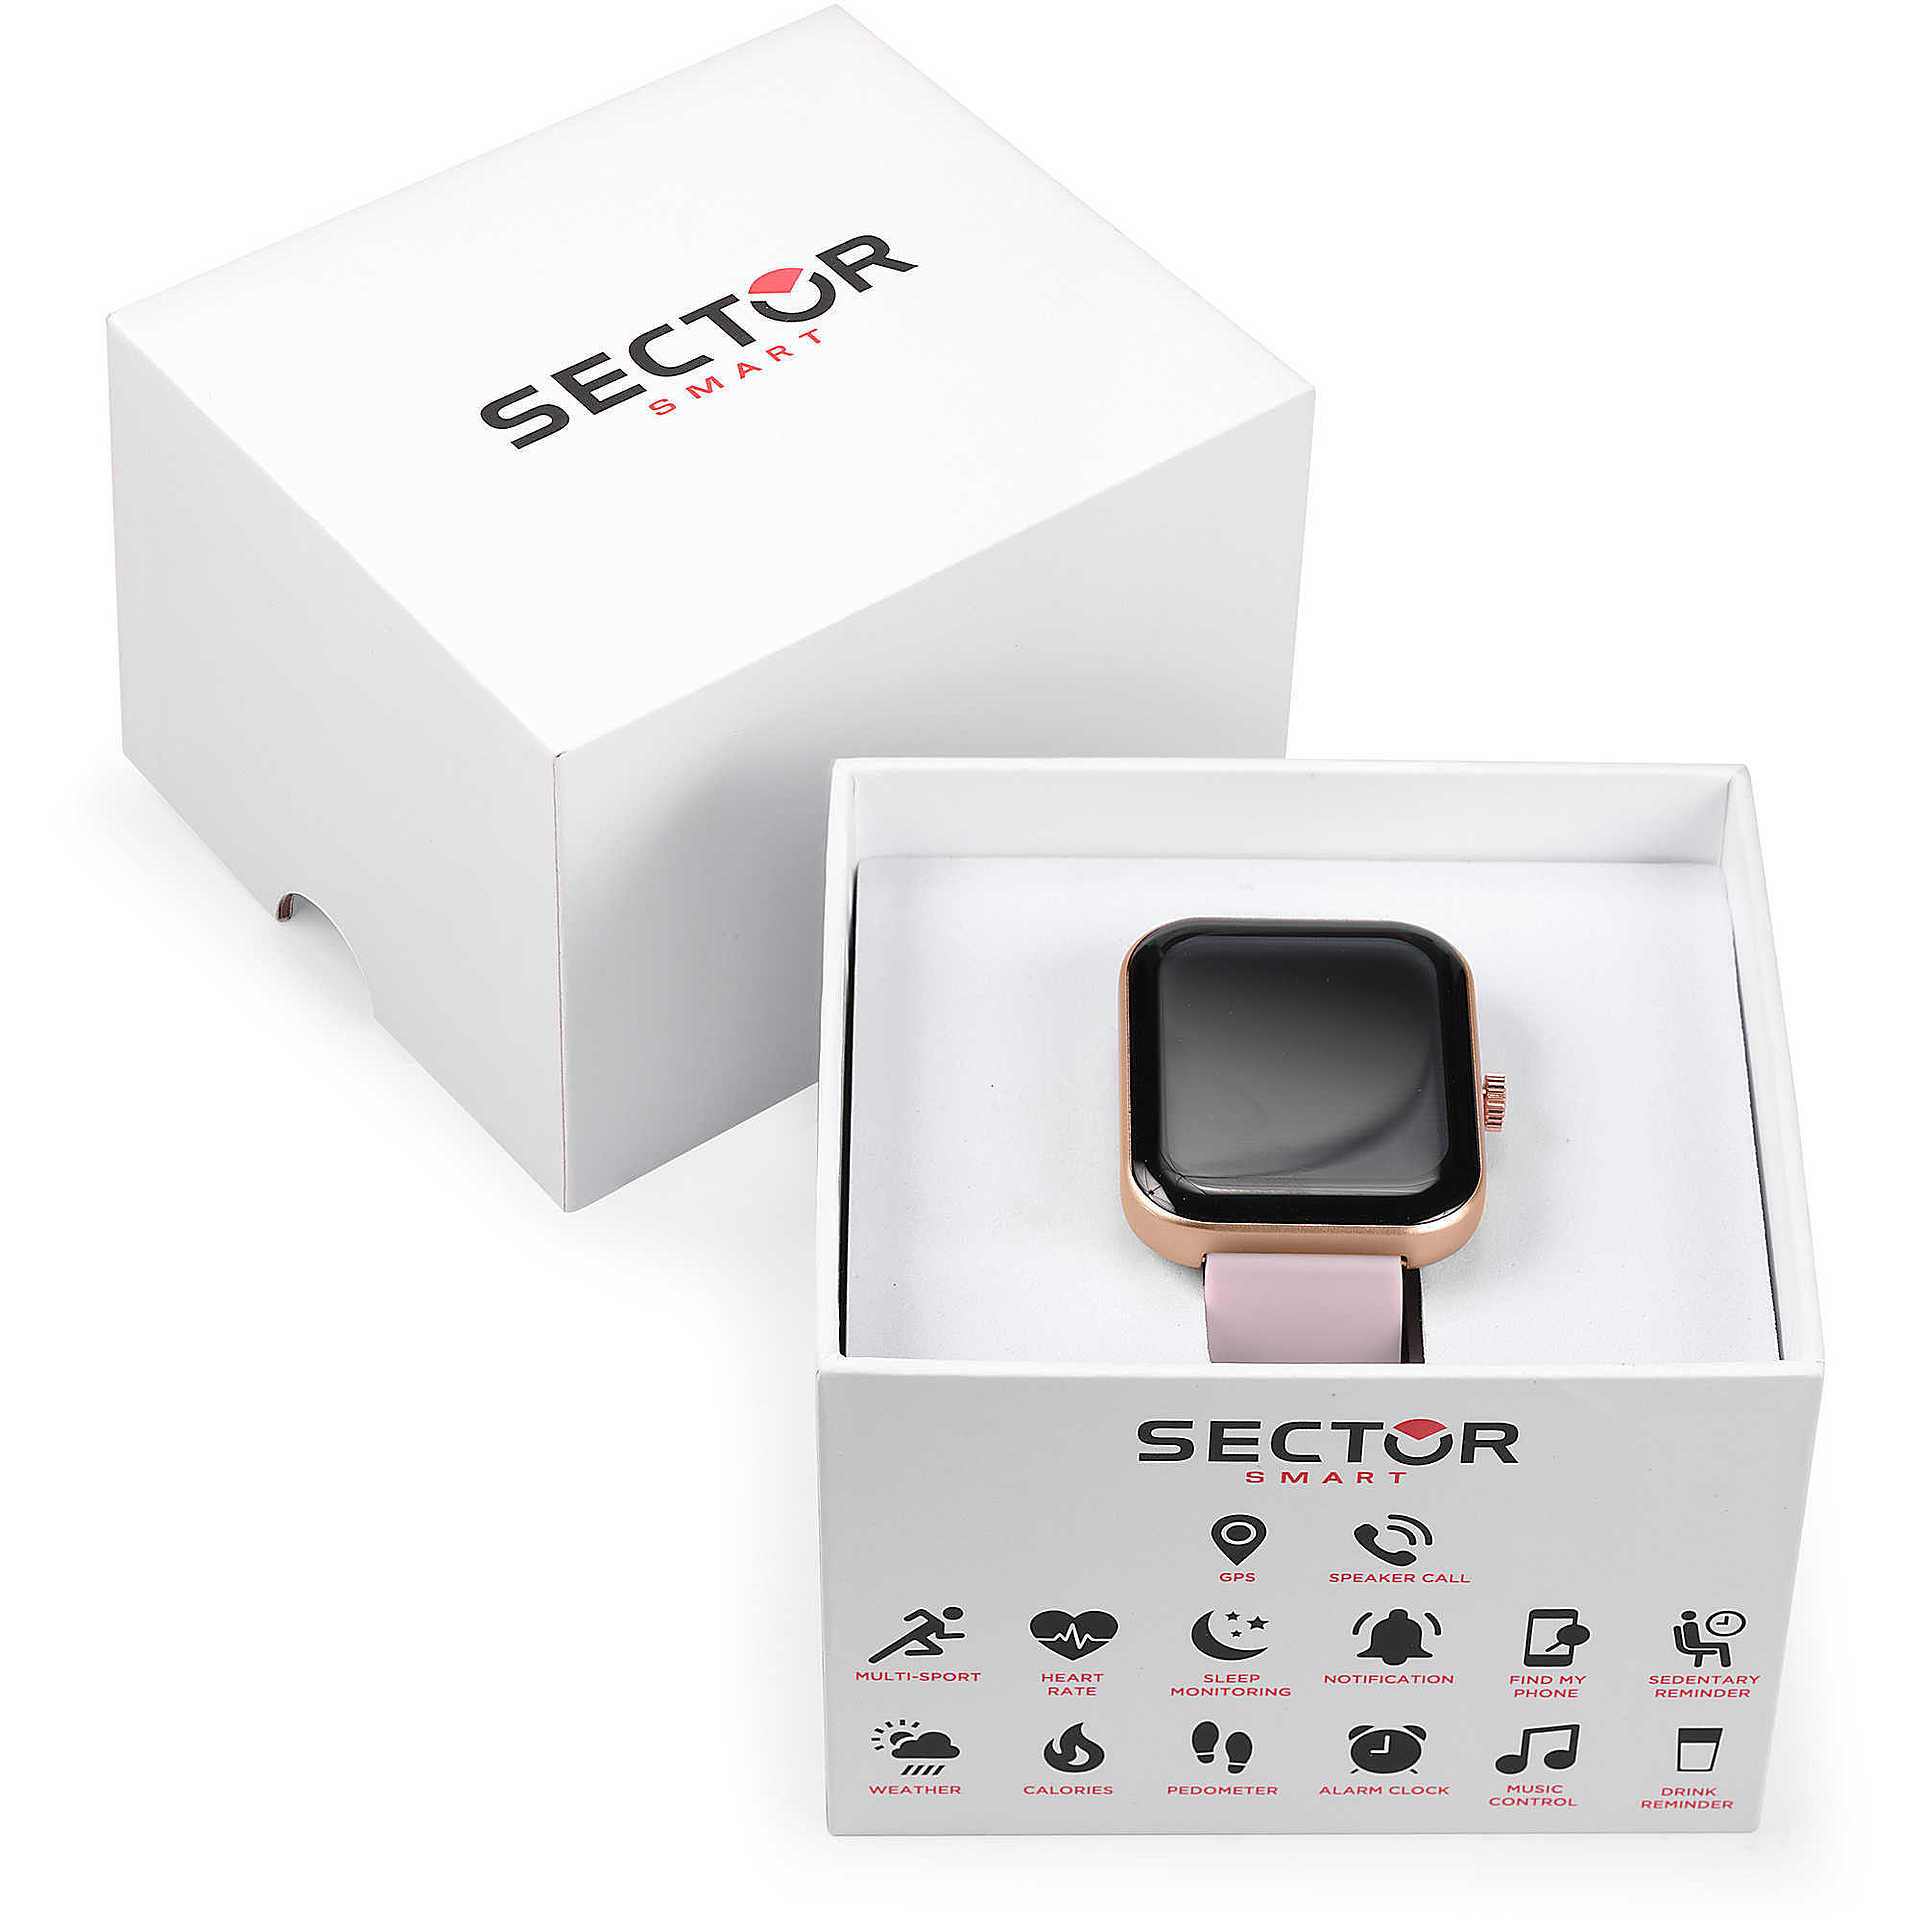 Smartwatch Donna Sector S-03 - R3251282002